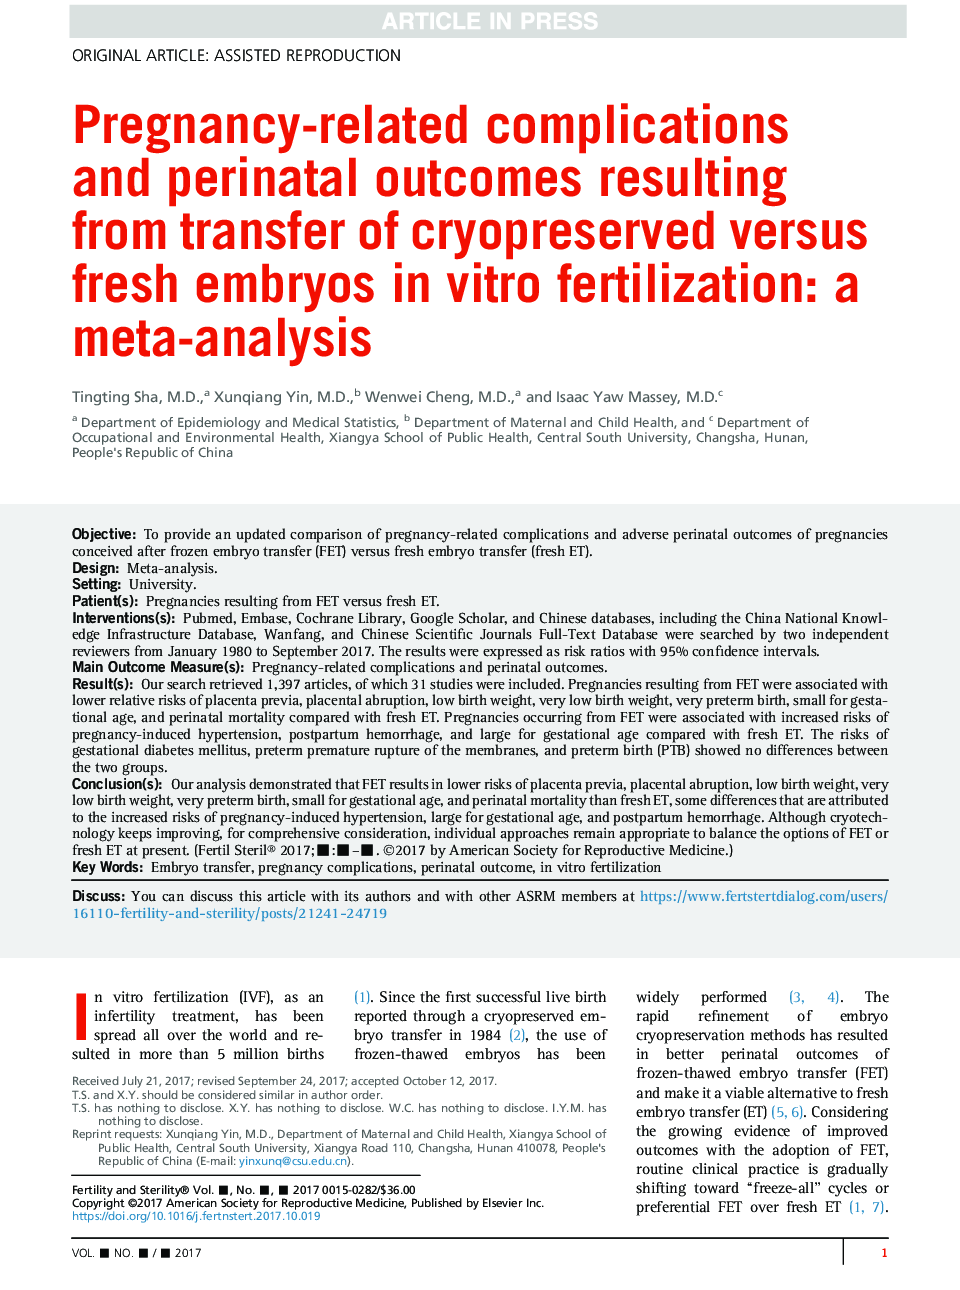 Pregnancy-related complications and perinatal outcomes resulting from transfer of cryopreserved versus fresh embryos inÂ vitro fertilization: a meta-analysis